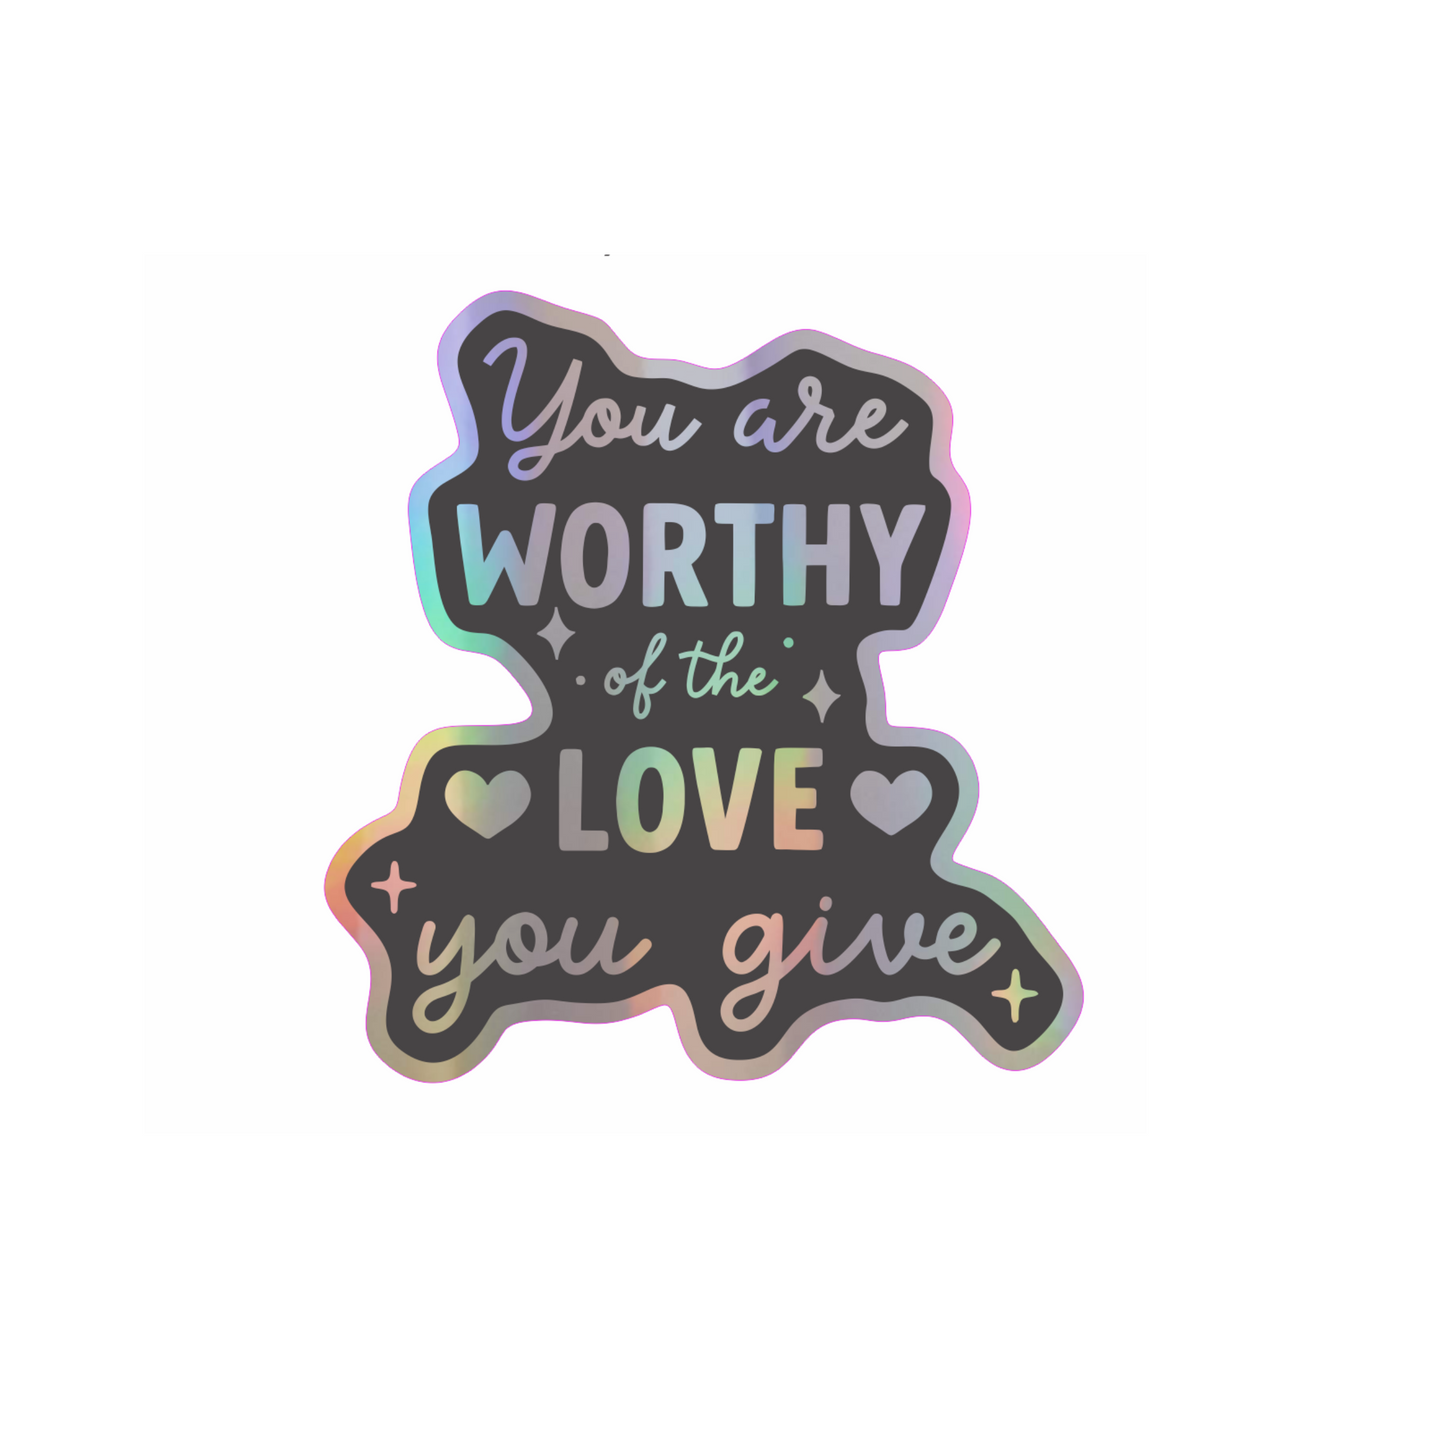 You're worthy of the love you give holographic vinyl sticker